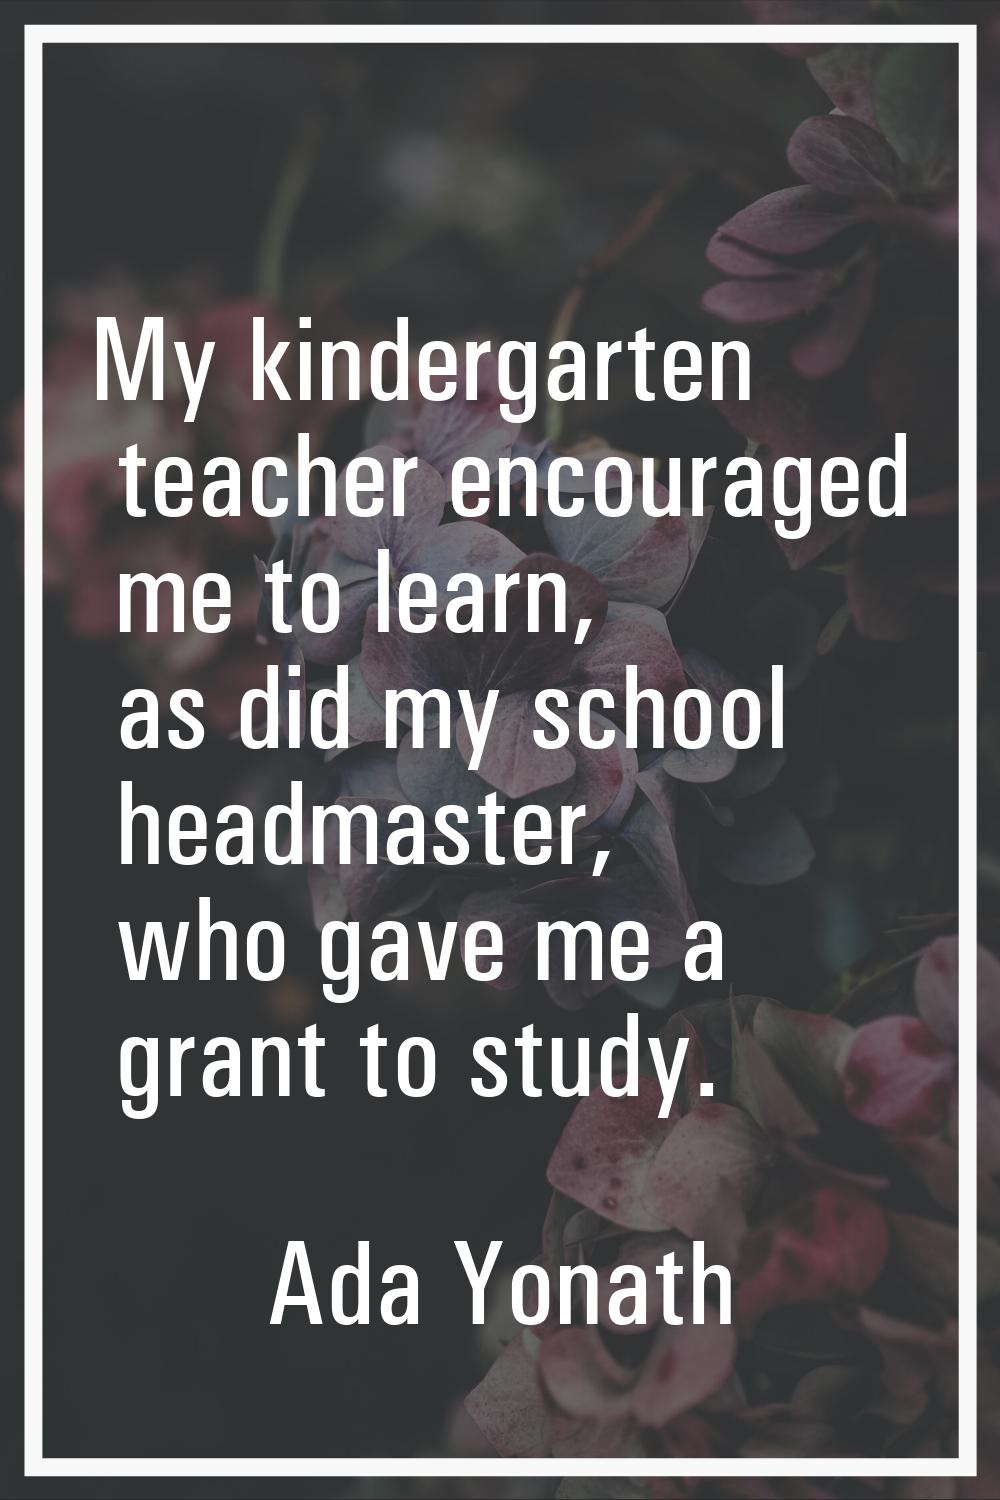 My kindergarten teacher encouraged me to learn, as did my school headmaster, who gave me a grant to